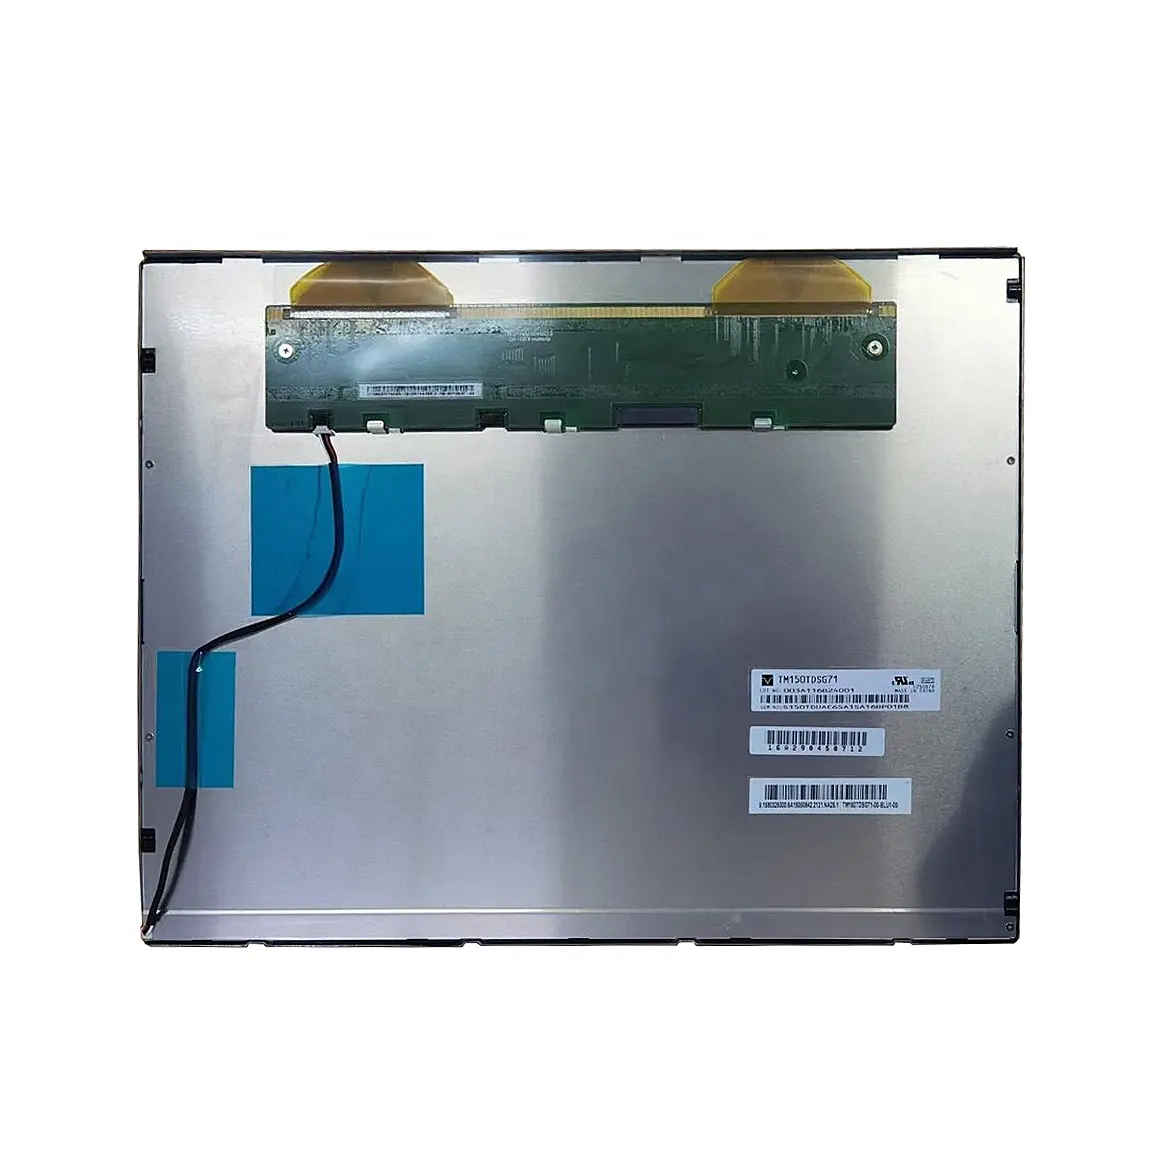 New TIANMA 15 inch TFT LCD Panels TM150TDSG71 Square Display Screen Integrated LED TN LCM module for Industrial Medical Use